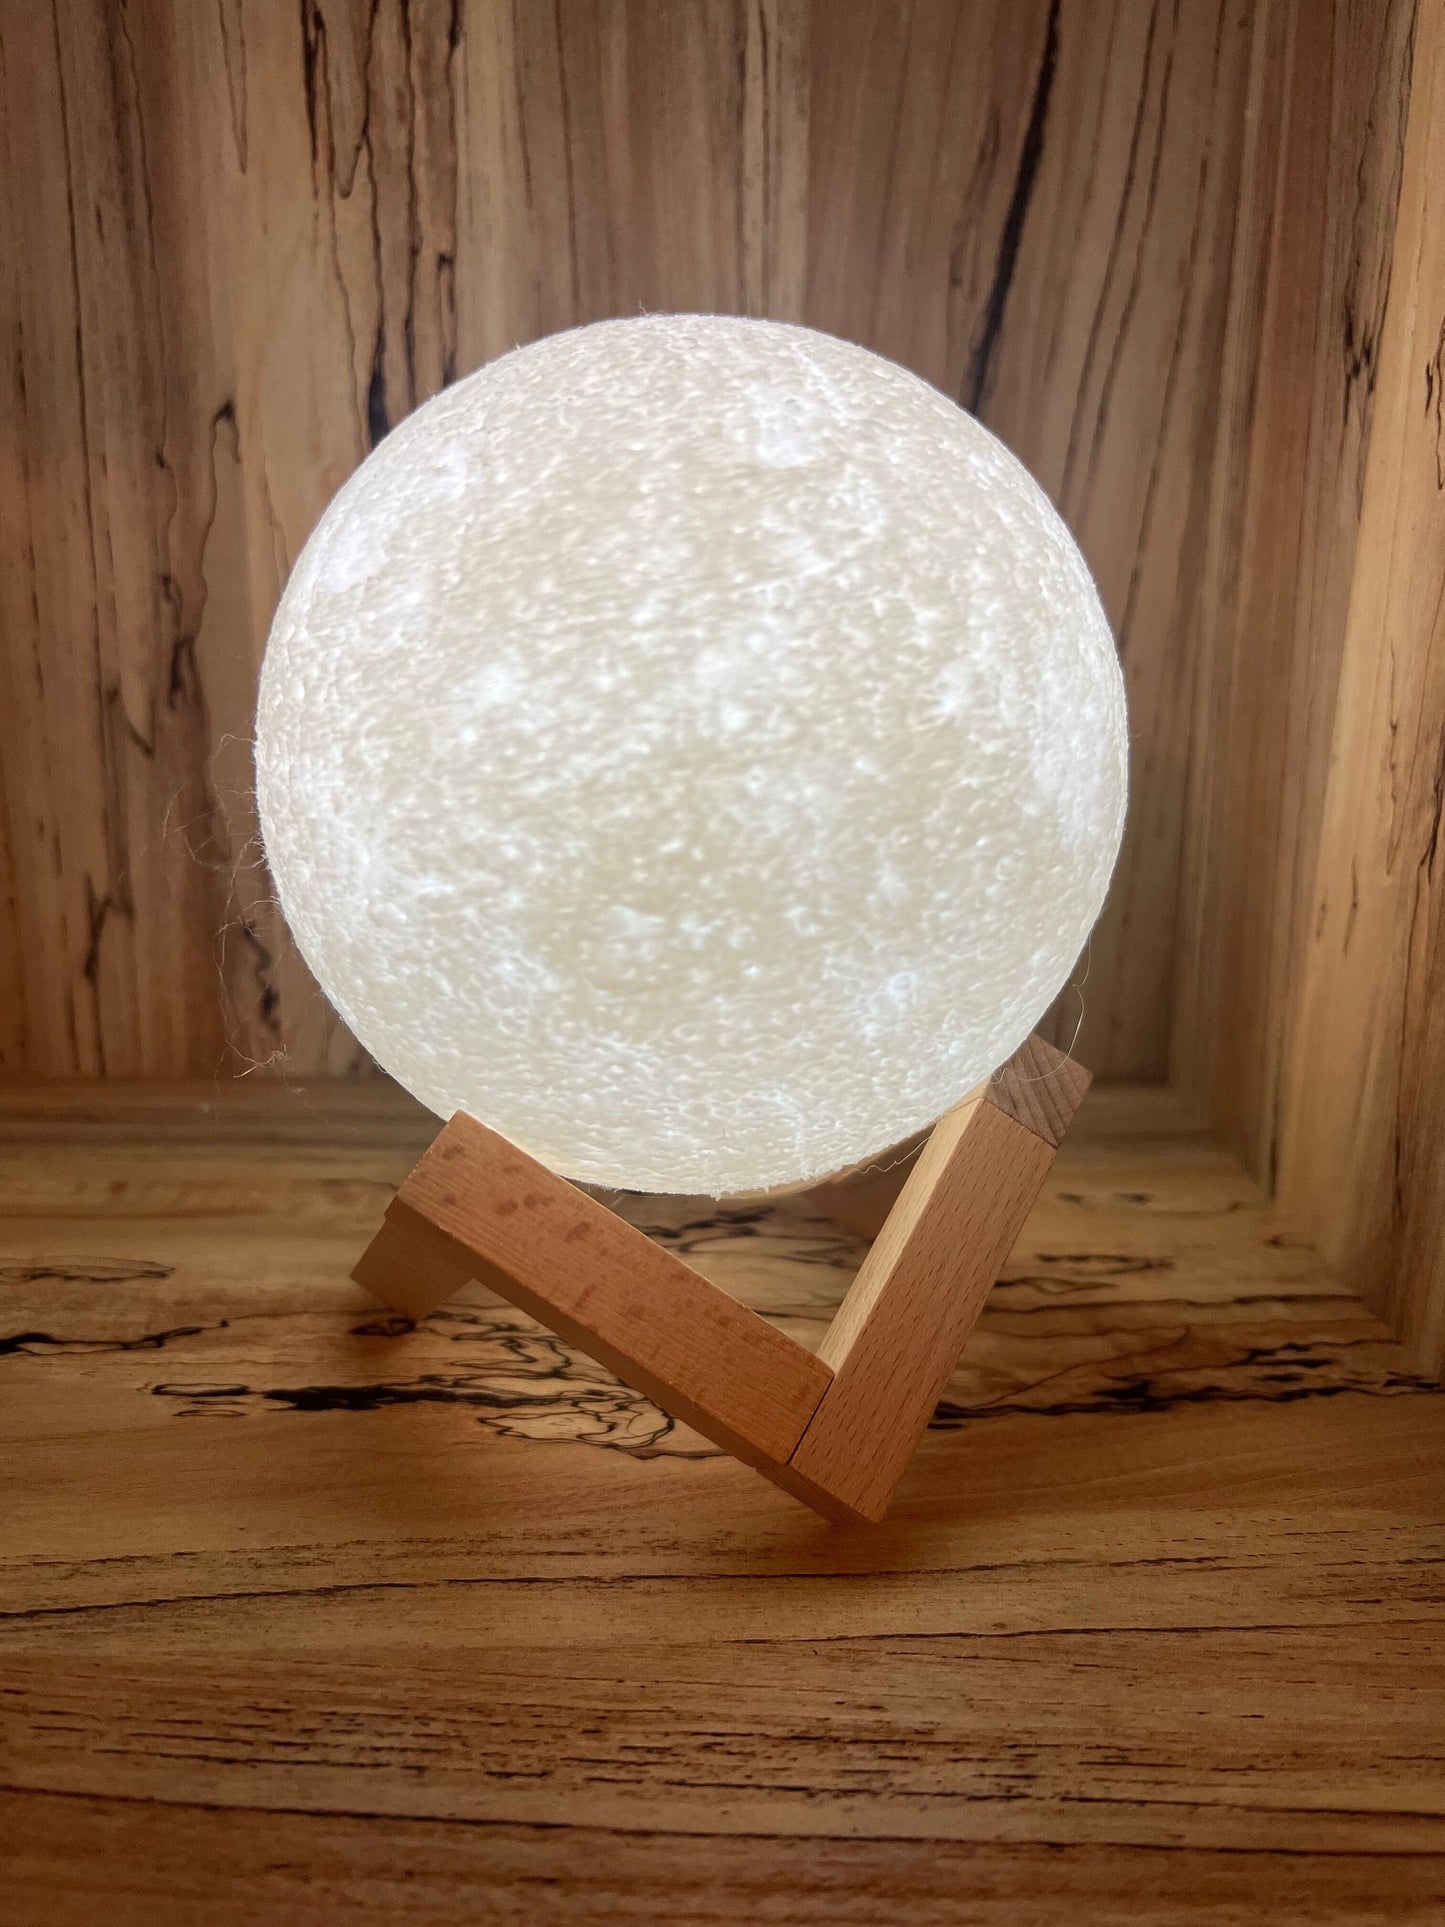 Planet Lamp globe, 16 Color Changing LED, Remote and Touch Control, 6.5-inch diameter, Rechargeable, Wooden Stand Included